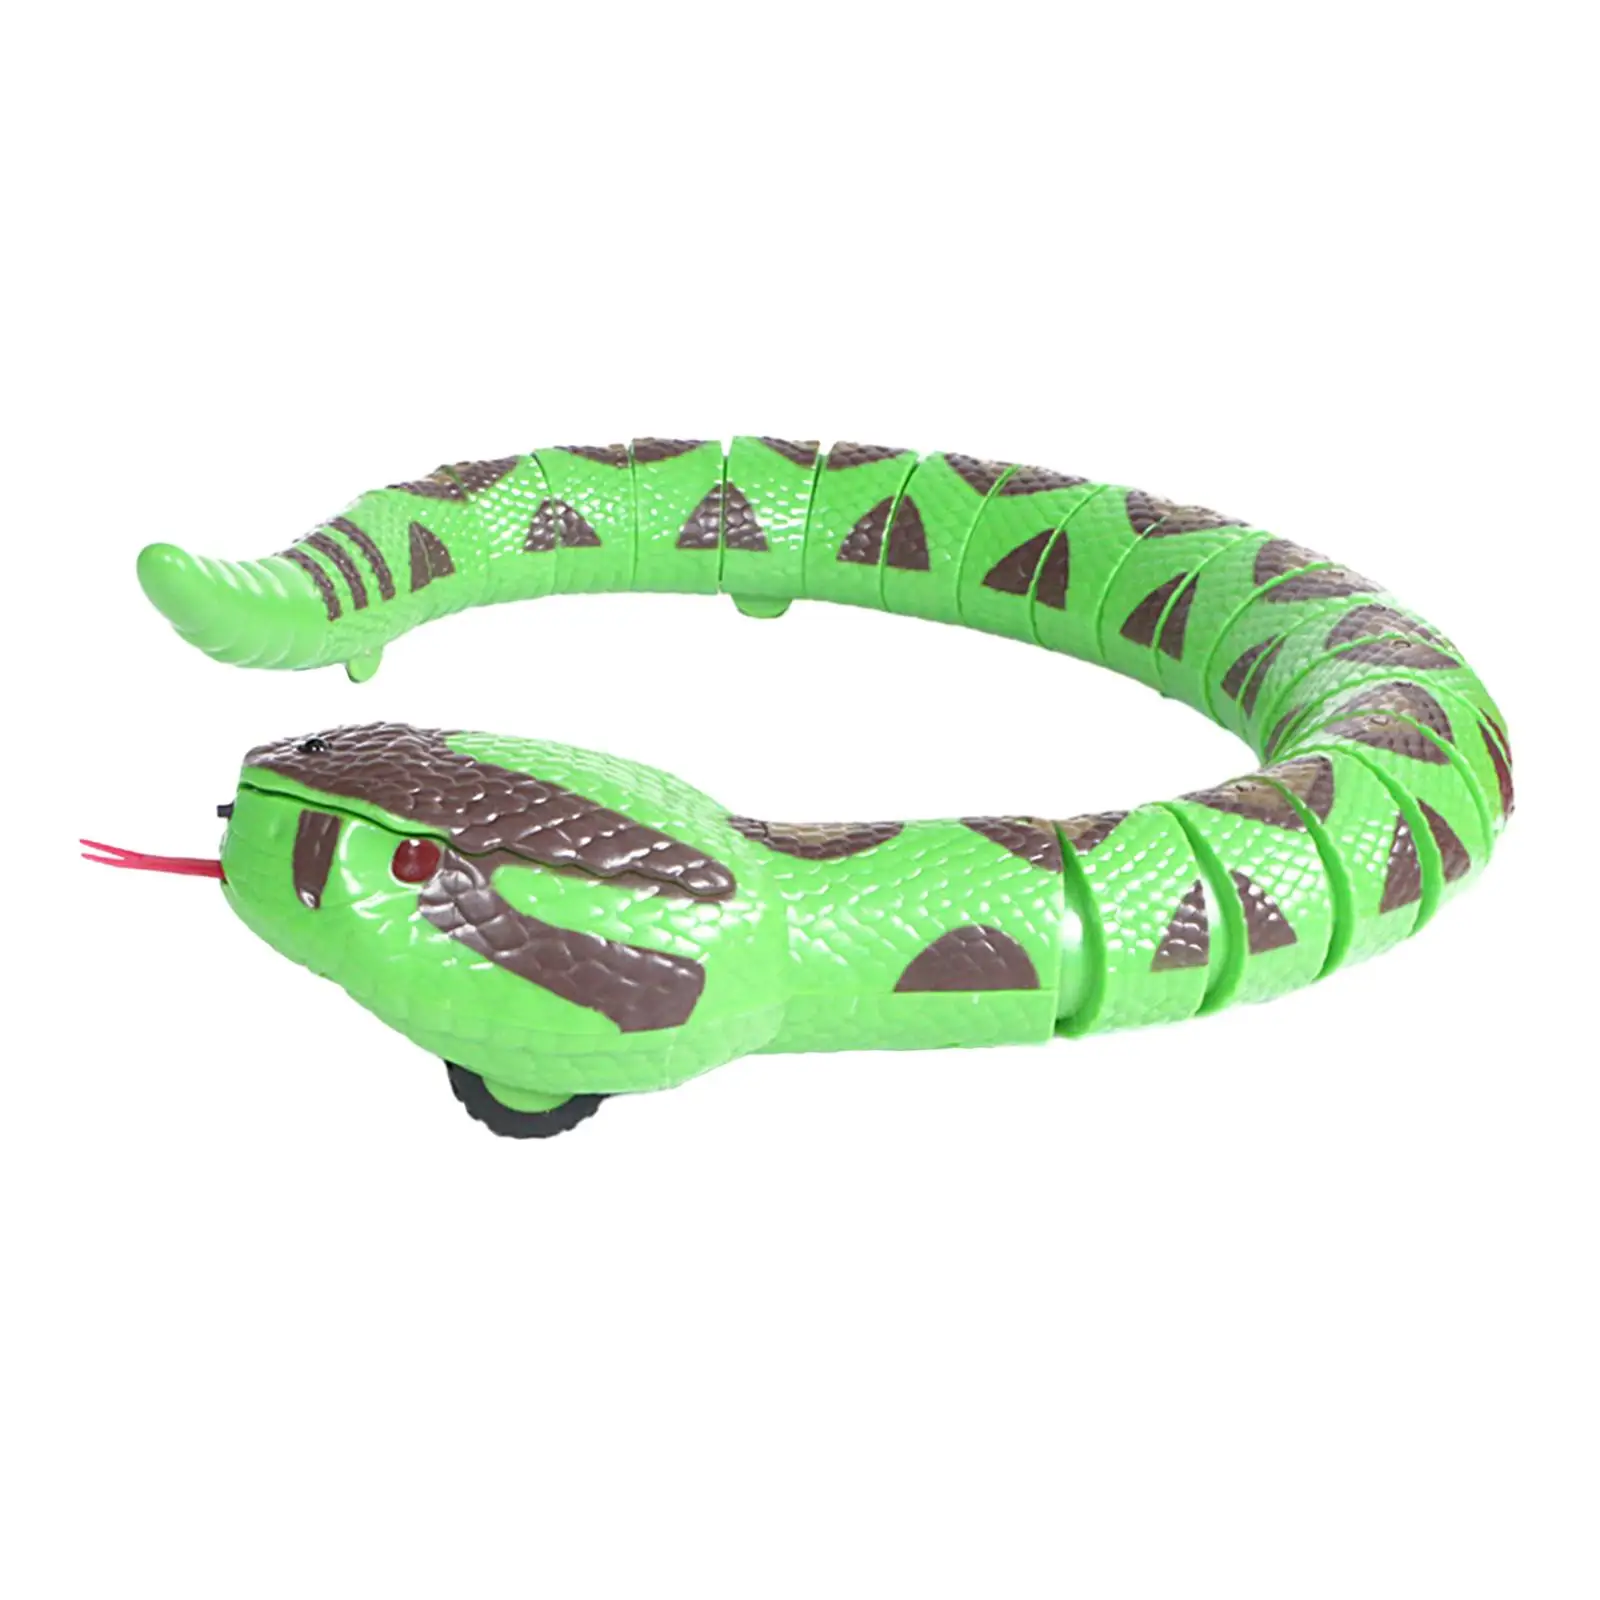 Cat Interactive Toy Crawling Snake Cat Toy Tricky Smart Sensing Snake Toy Electric Snake Toy for Cats Pet Accessories